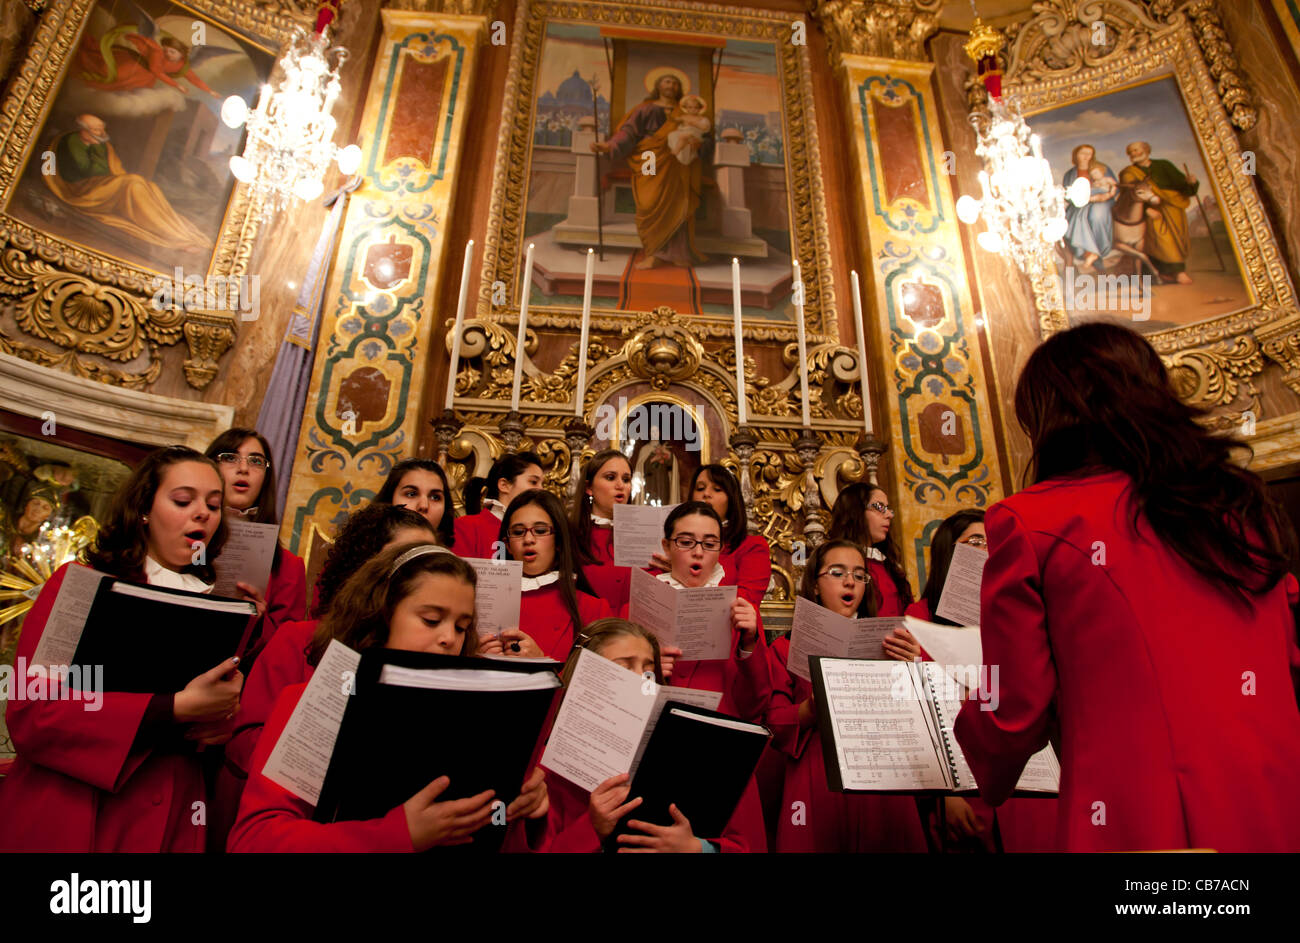 A choir singing during the High Mass at the stroke of midnight on Christmas Eve in the town of Xaghra in Gozo in Malta. Stock Photo